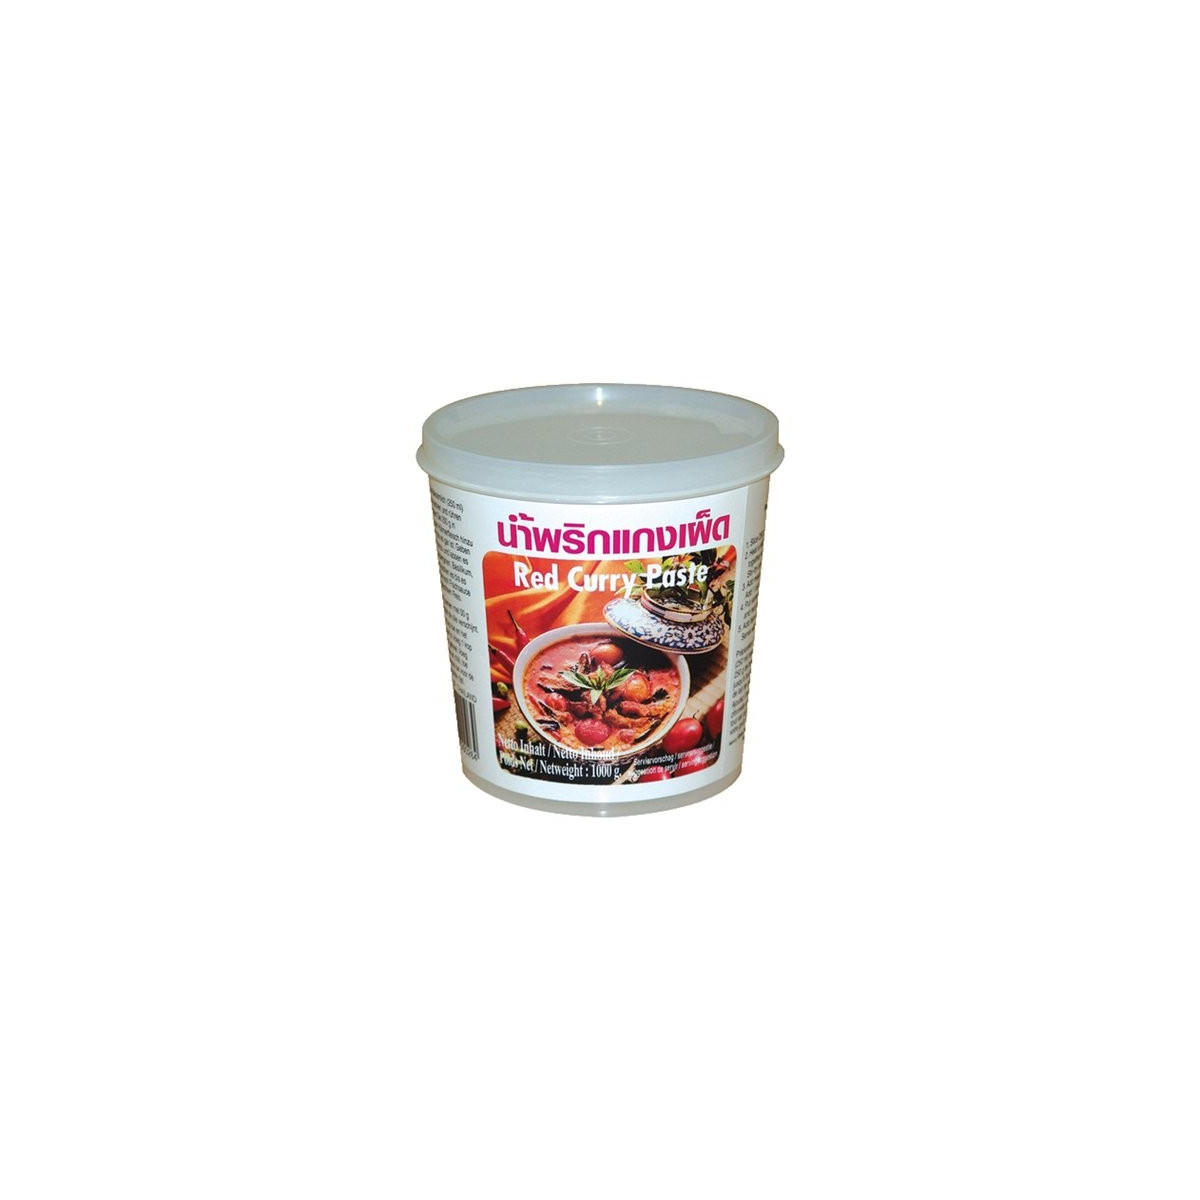 Red Curry Paste 400g - Mae PLoy